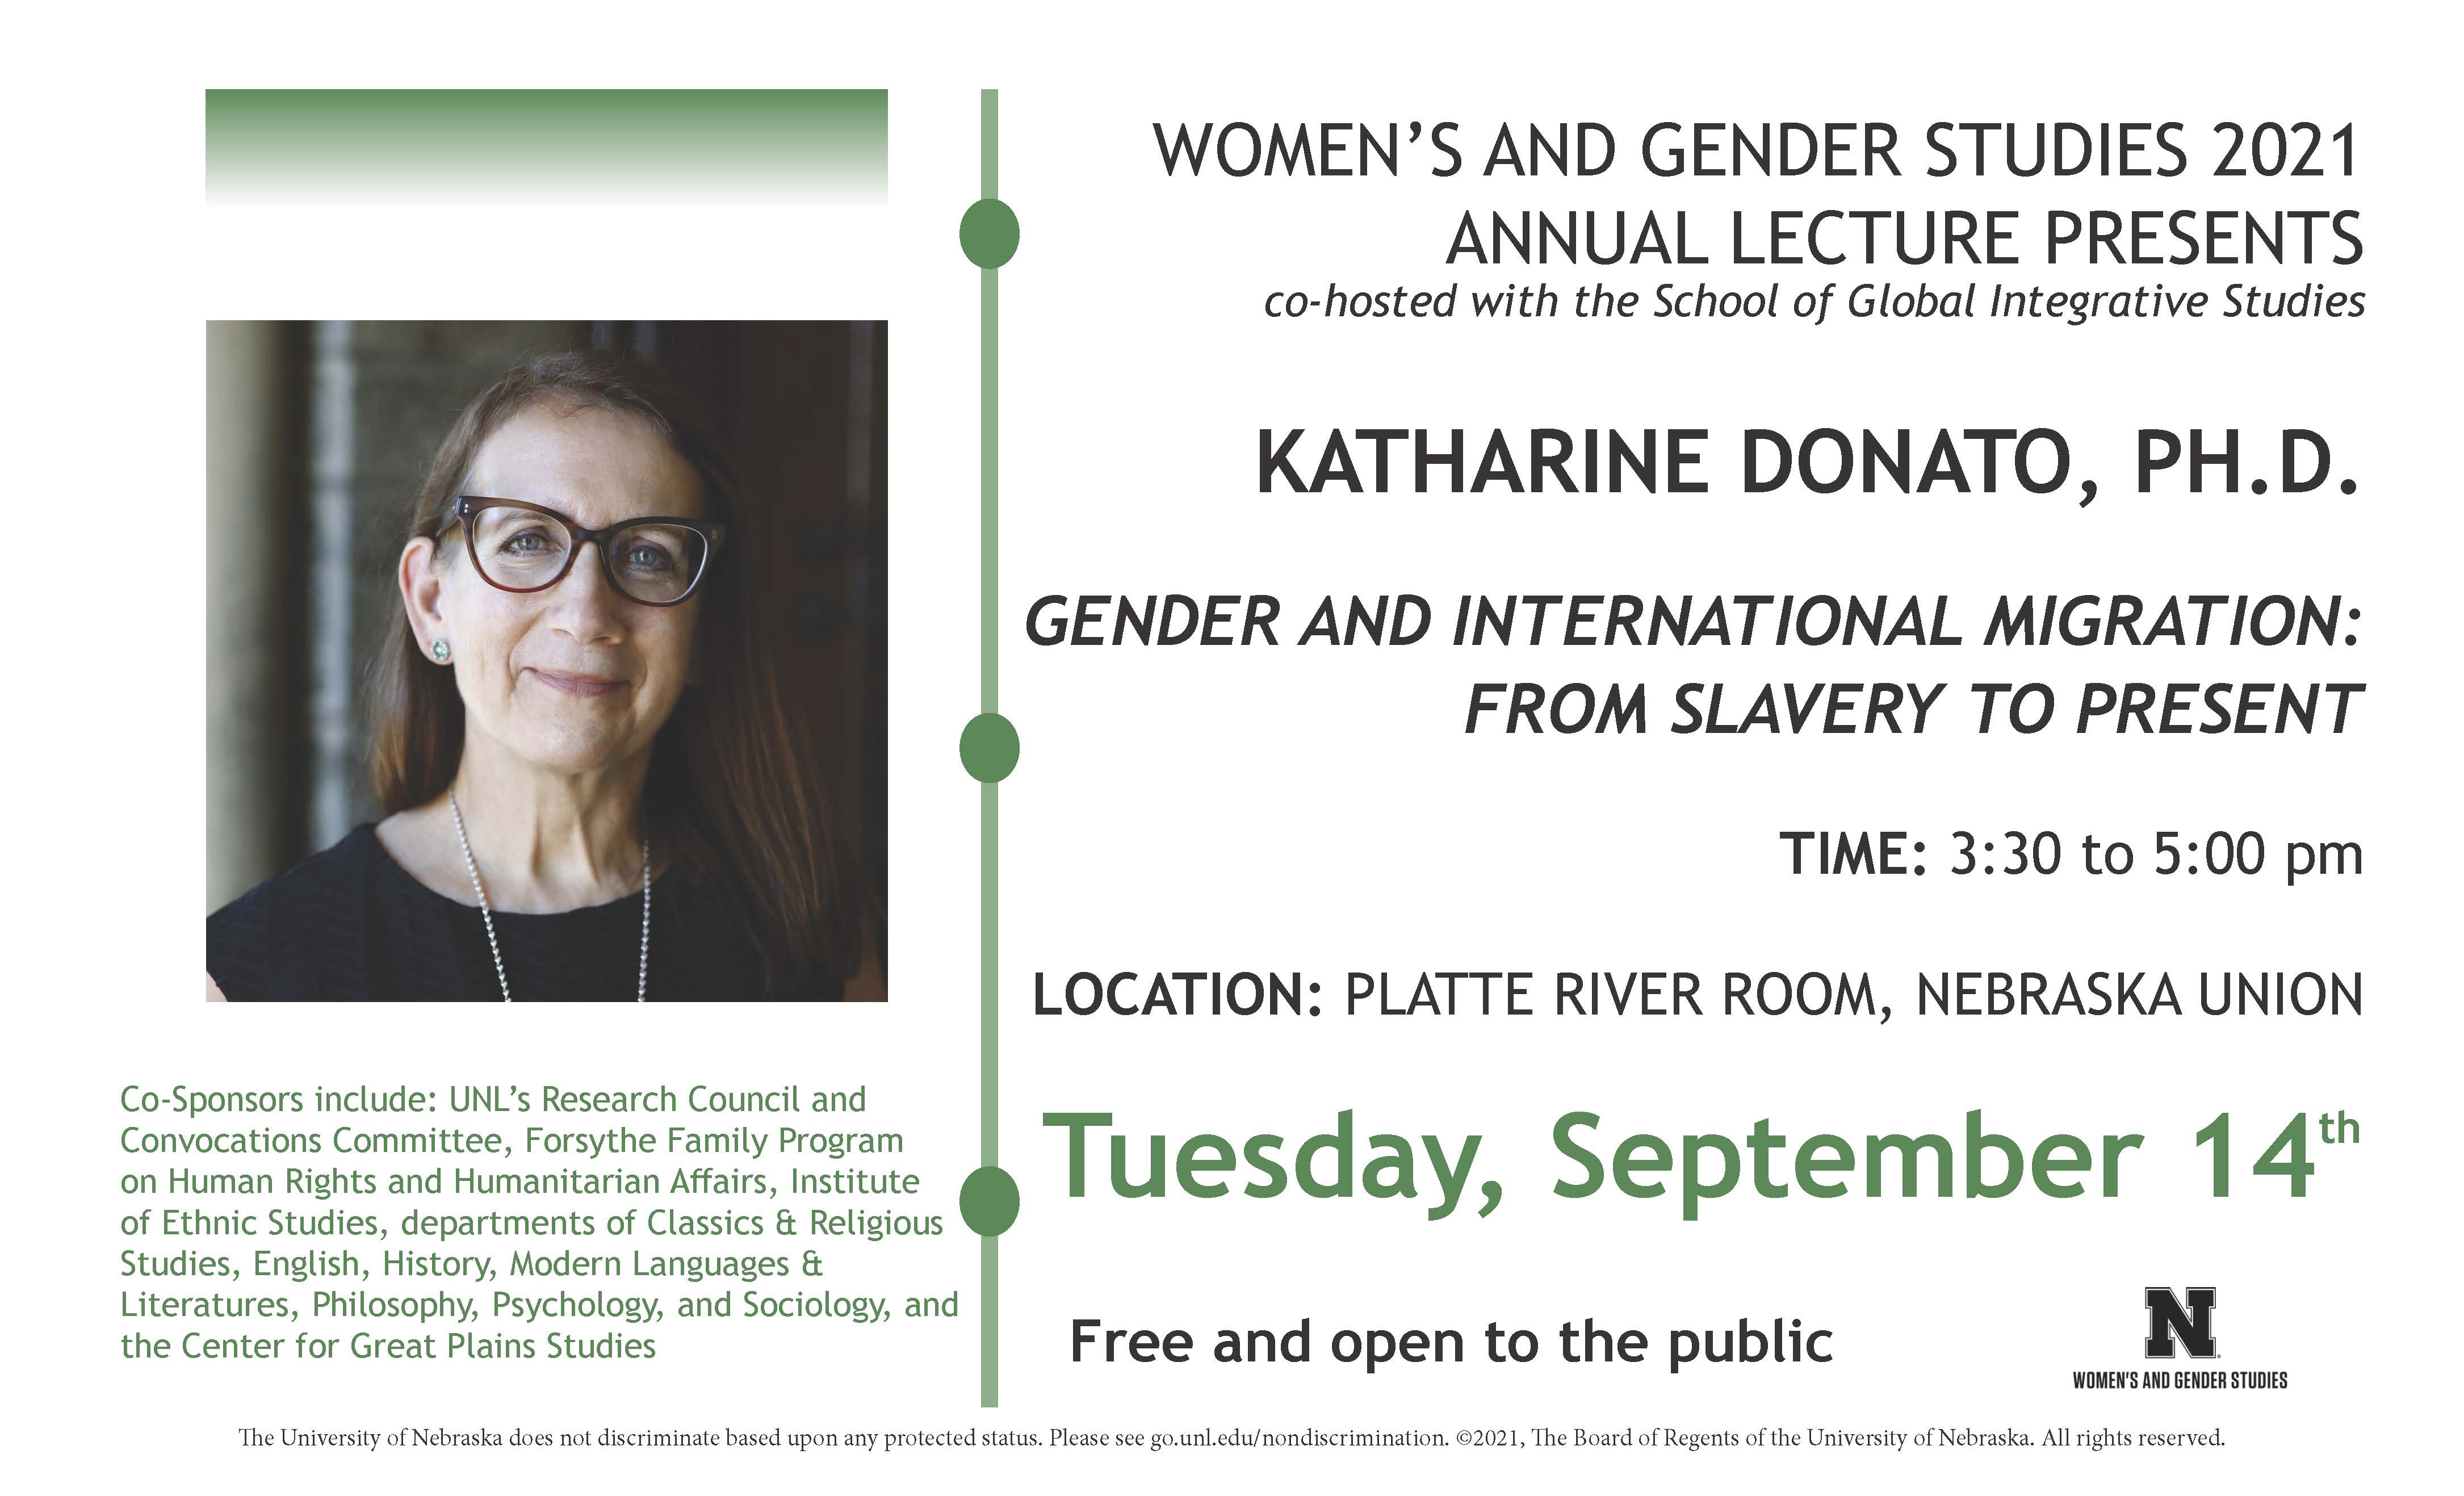 Gender and International Migration: From Slavery to Present with Dr. Donato